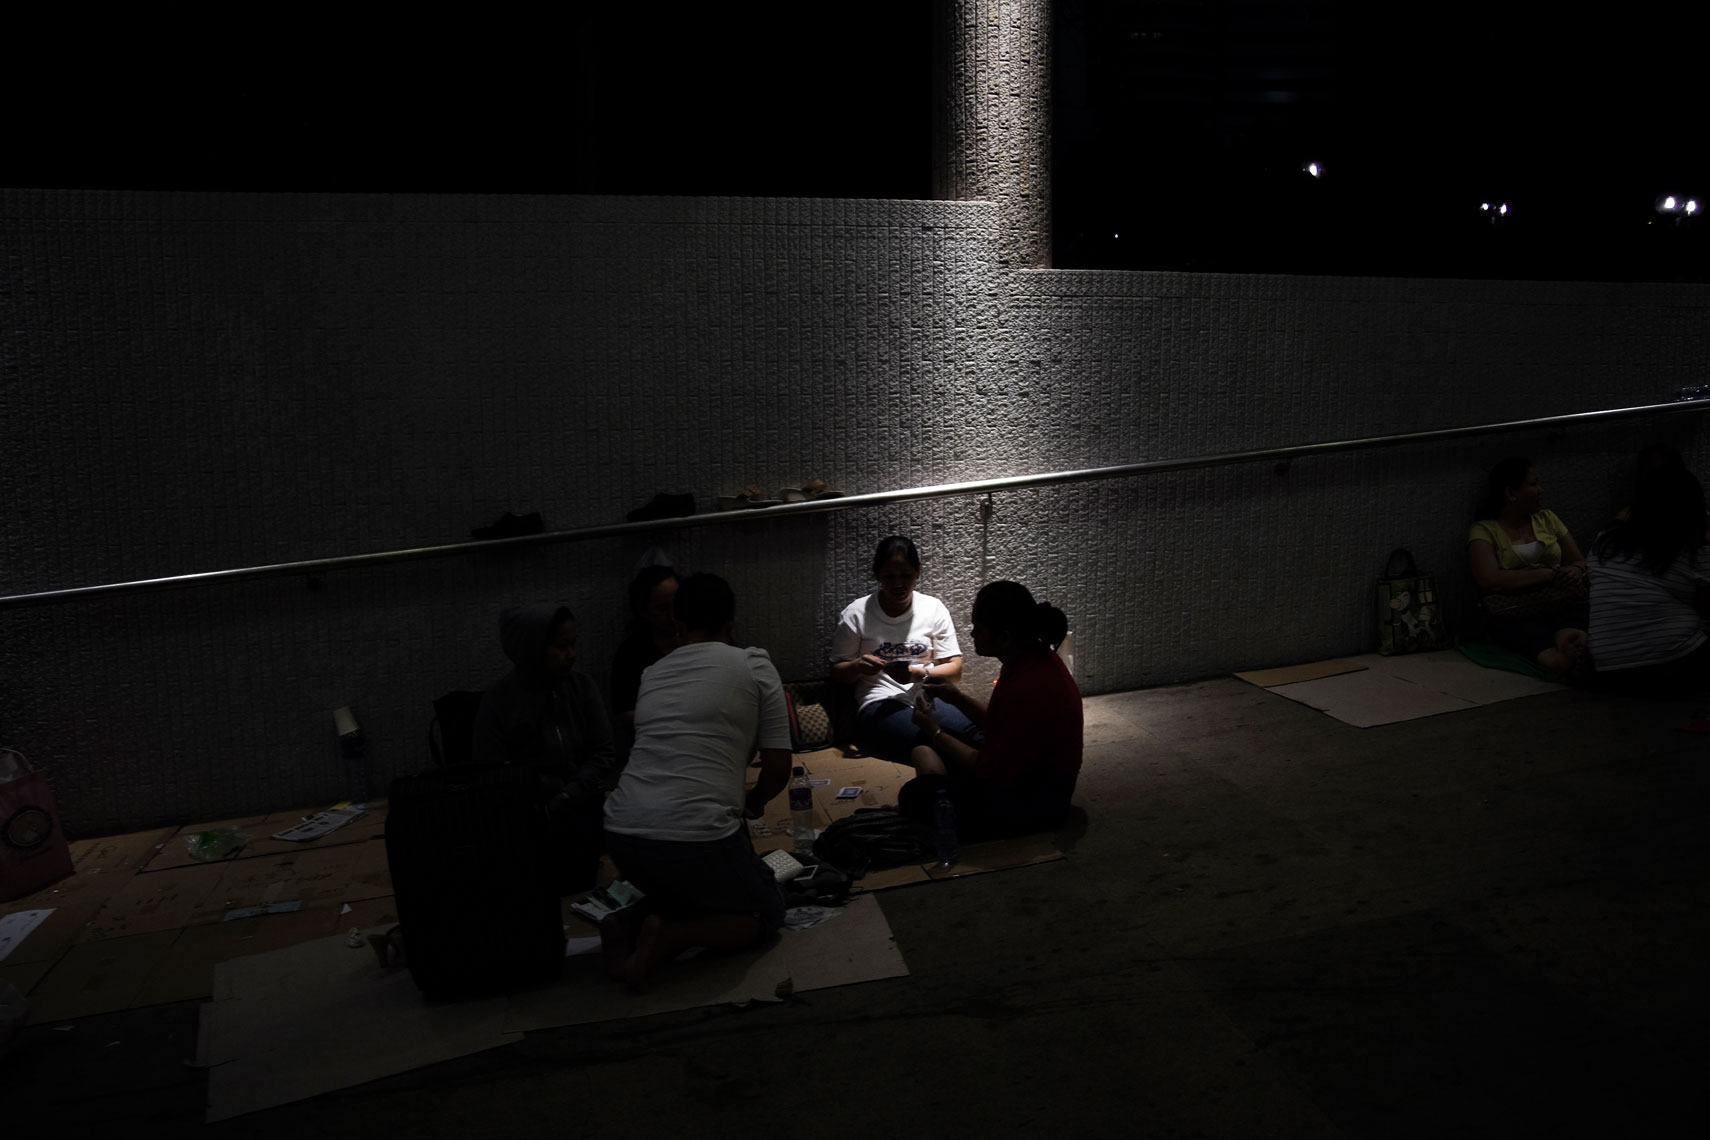 CHINA. Hong Kong, October 2012. Women have a sit in a pedestrian passage. Many immigrant workers from other asian countries gather and seat on sidewalks and public places to talk each other or to have lunch and dinner together.